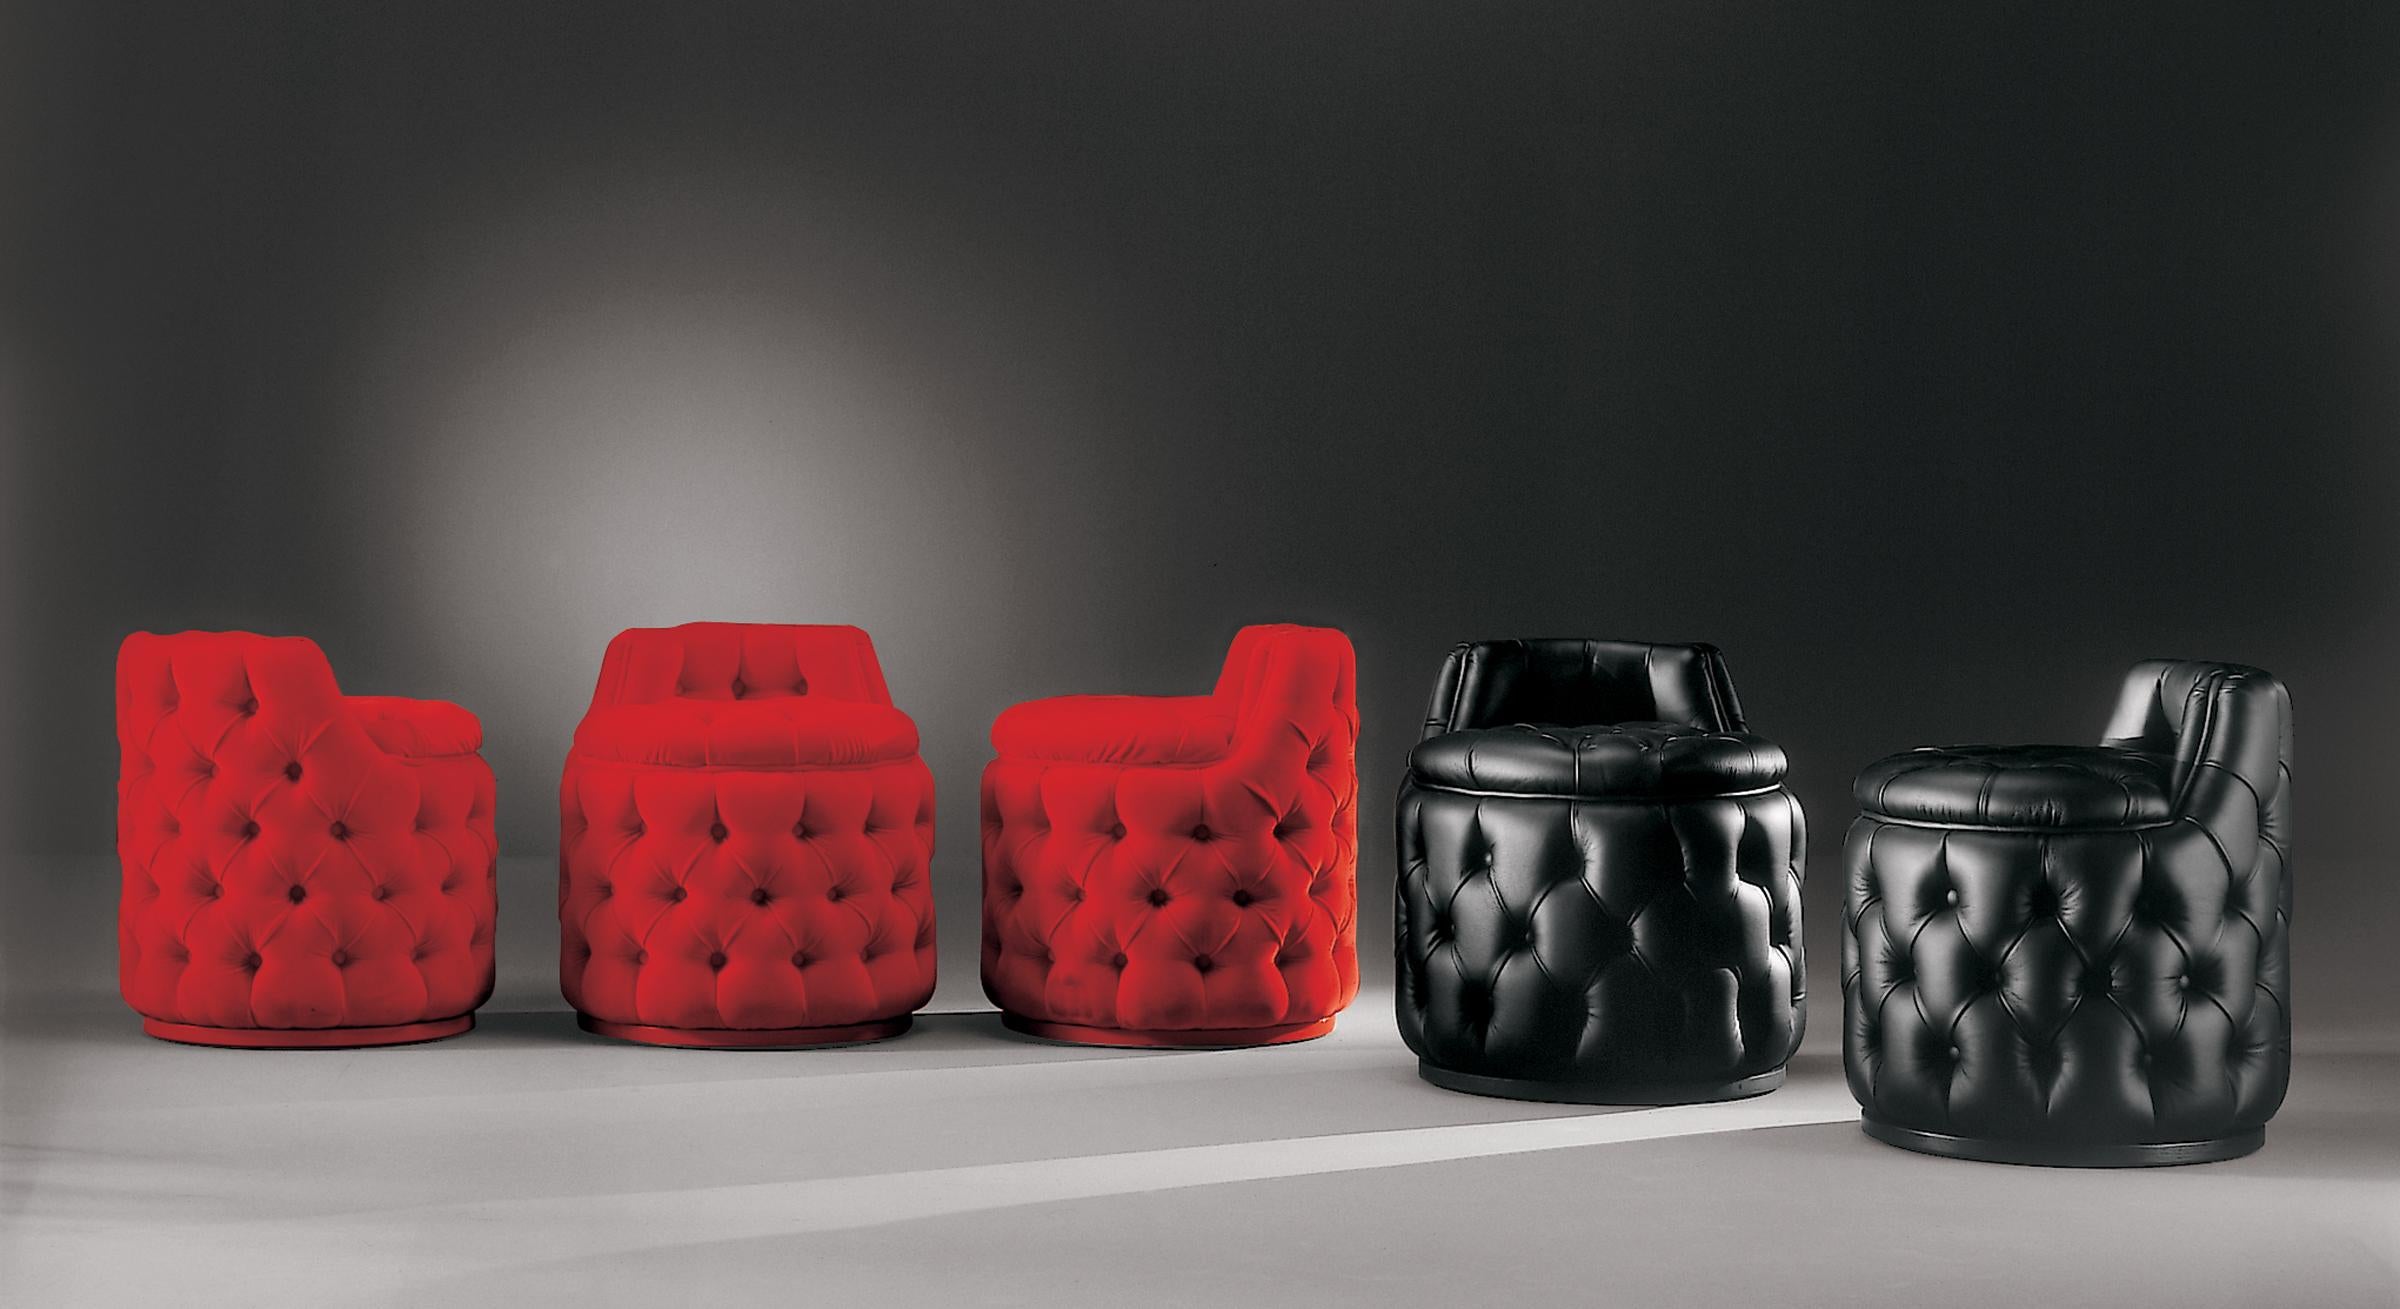 Introducing the Billy round tufted stool—a perfect blend of comfort and style for your living space. Elevate your home decor with this versatile piece, available in a sleek black leather or a rich red velvet tissue. The meticulous tufted design adds